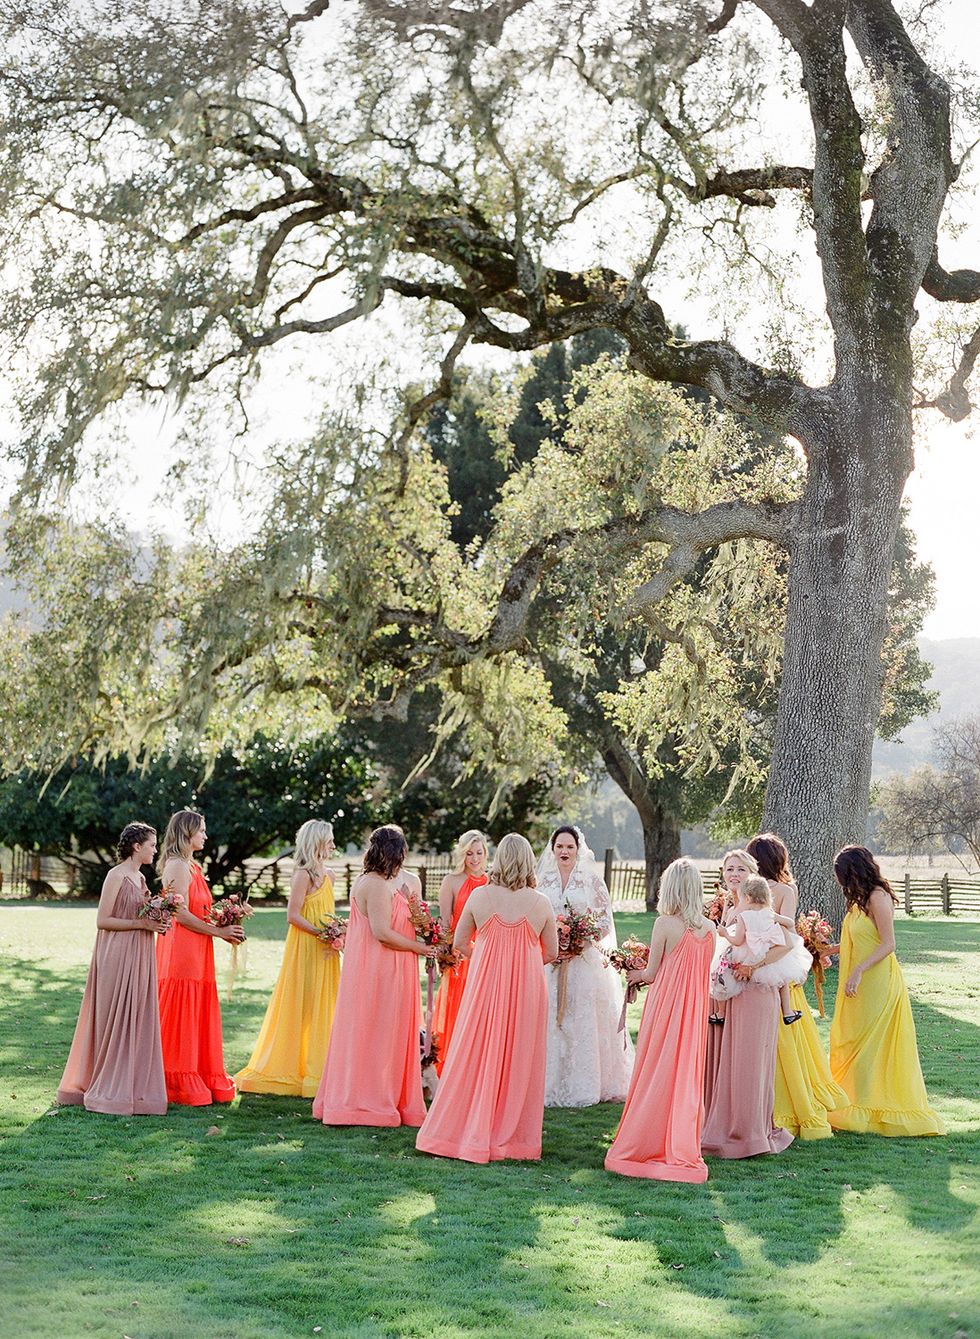 Branch, Tree, People in nature, Dress, Formal wear, Gown, Peach, Beauty, Tradition, Spring, 